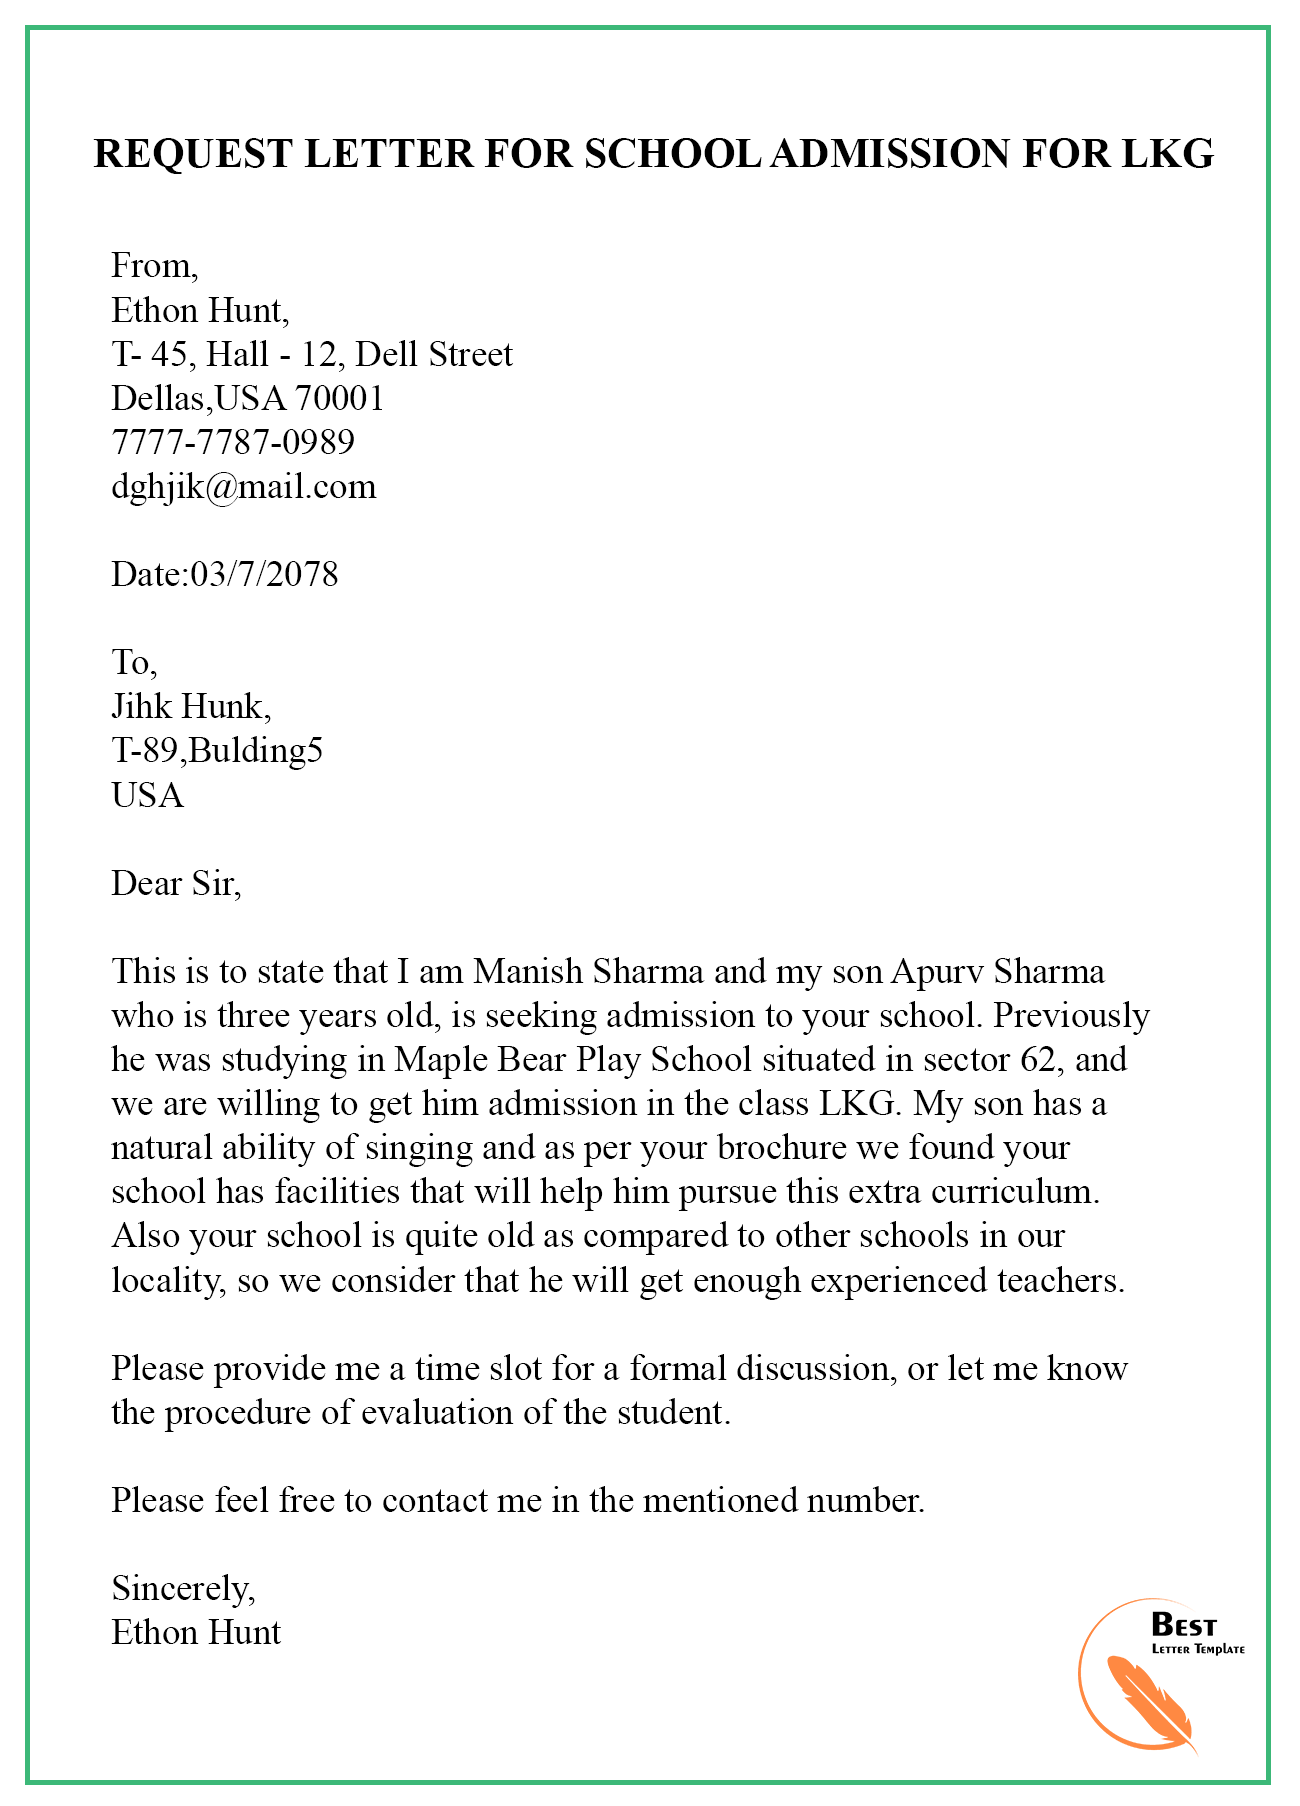 application letter of school admission